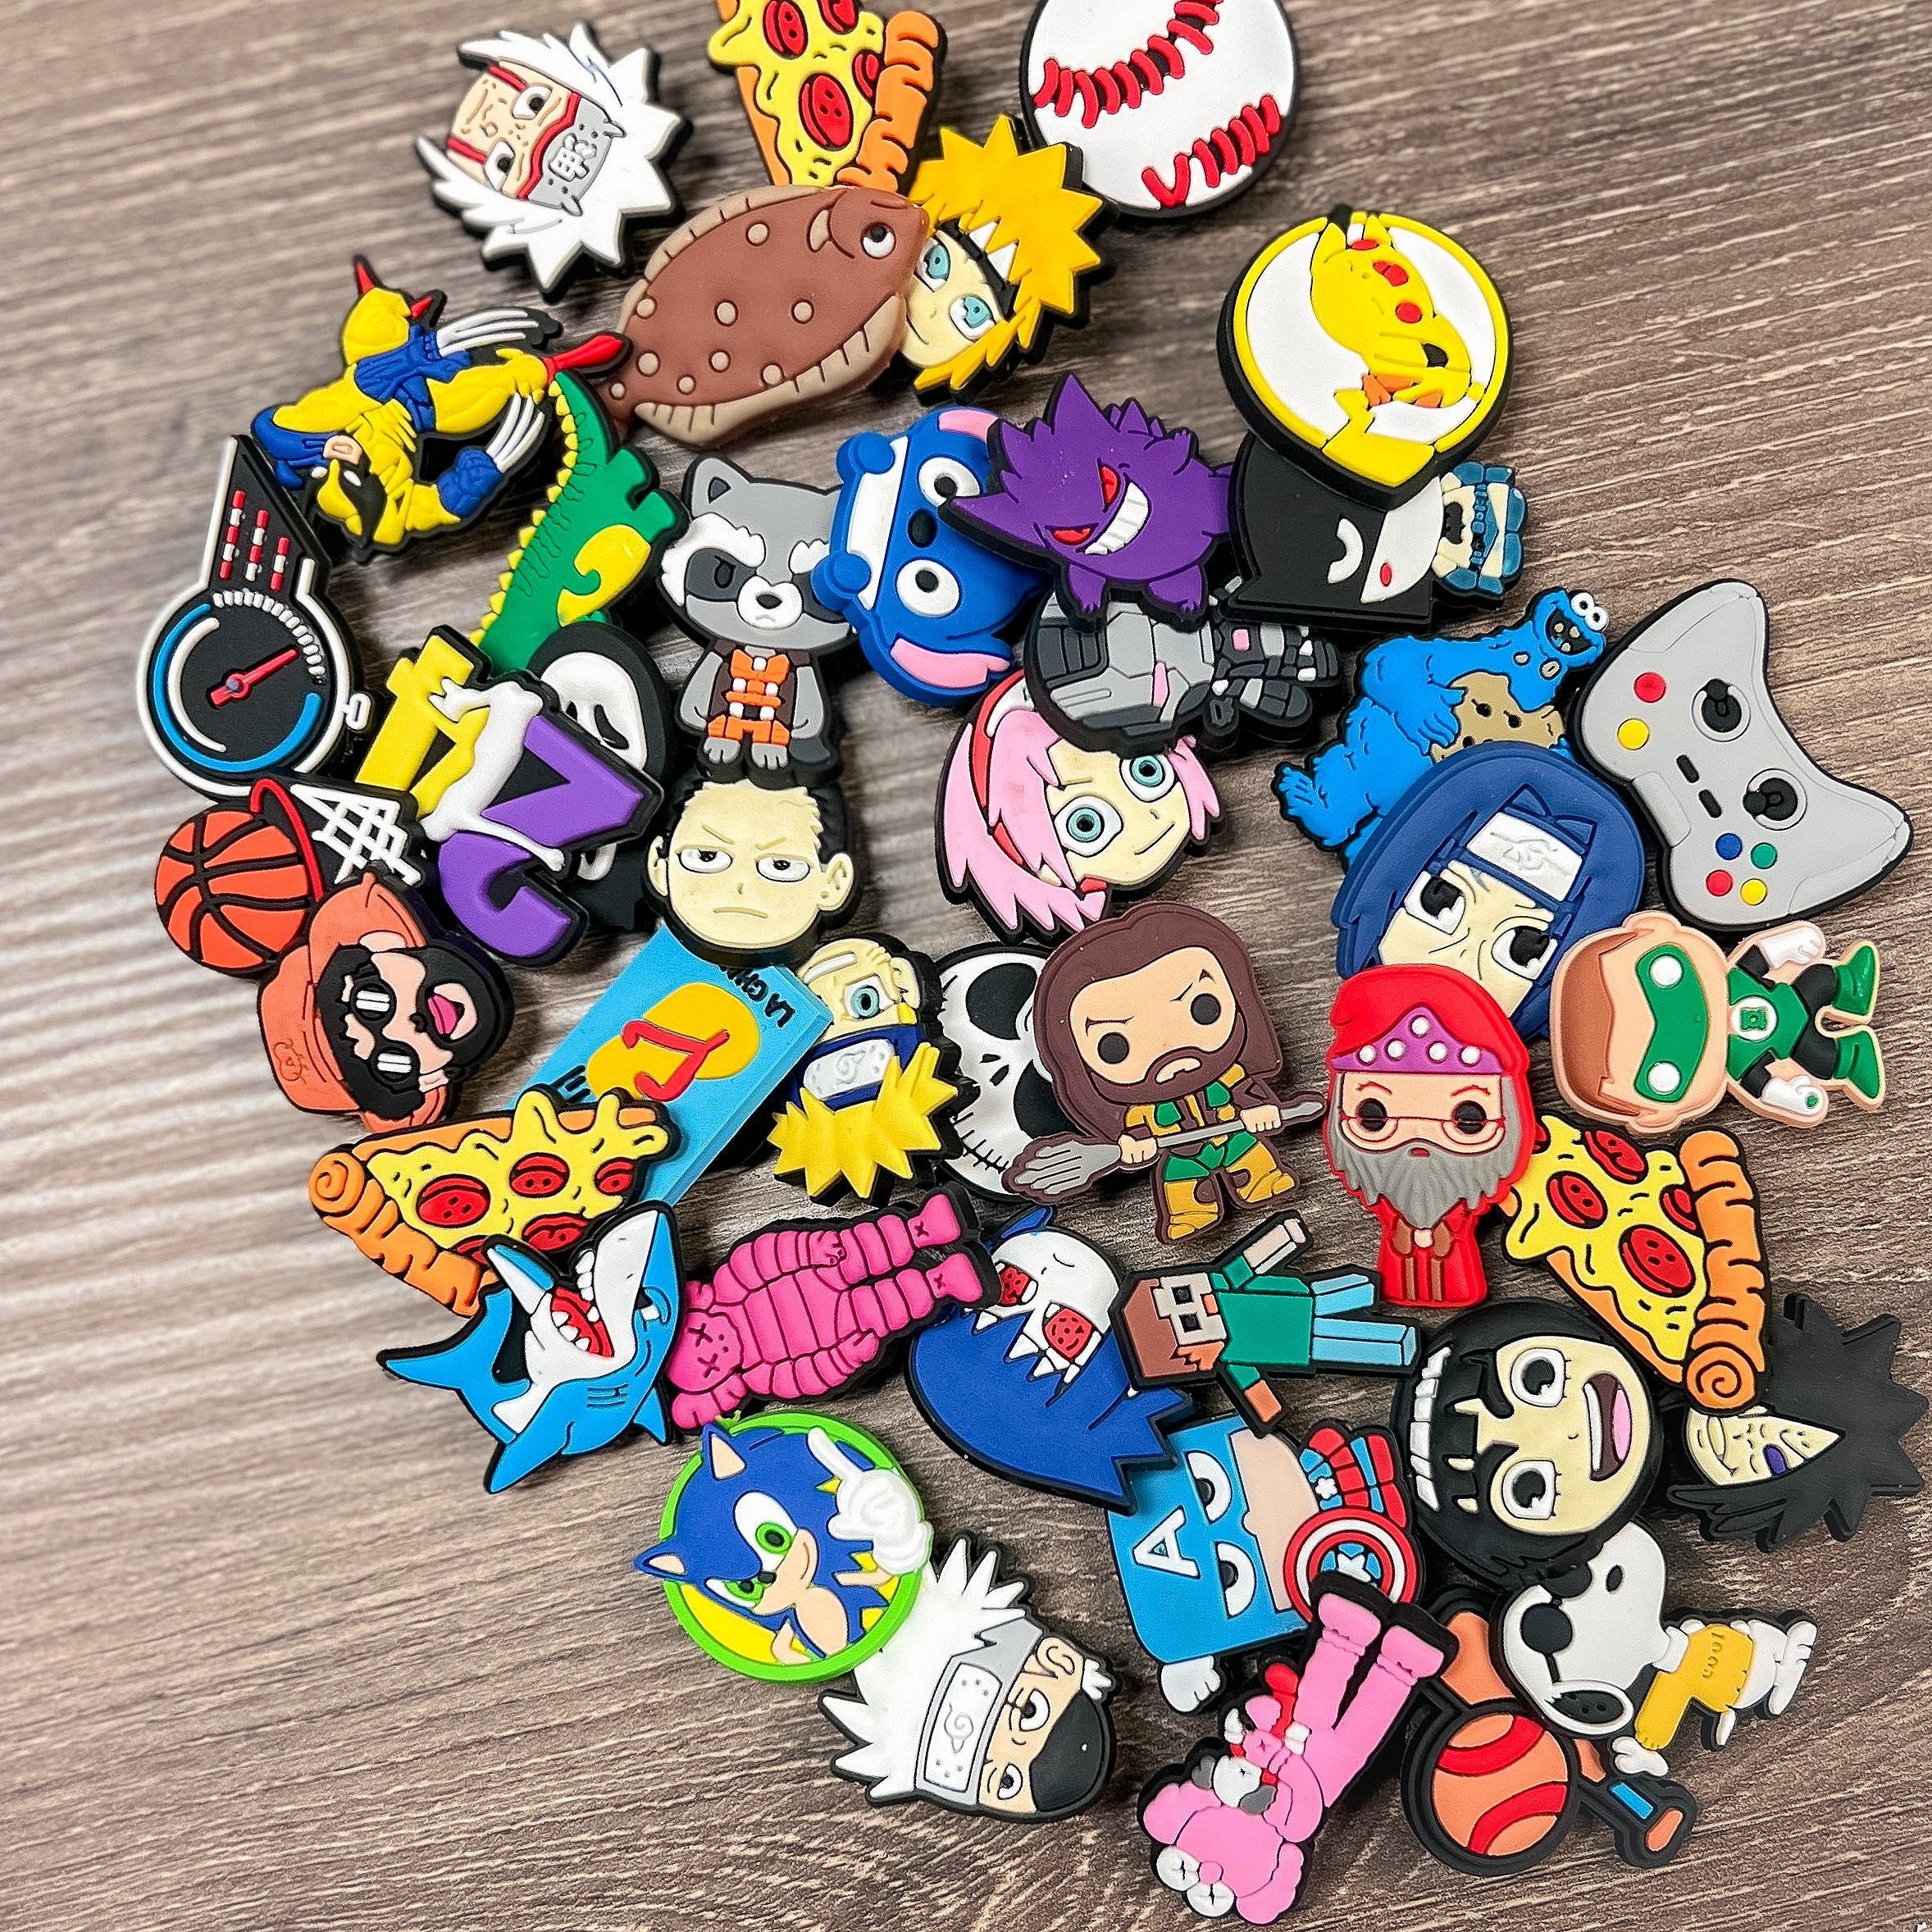 Wholesales 10 Pieces/lot PVC Anime My Hero Academia Shoe Charms Cartoon  Jibz for Croc Kids Shoe Buckle Back Buttons for Crocs - AliExpress